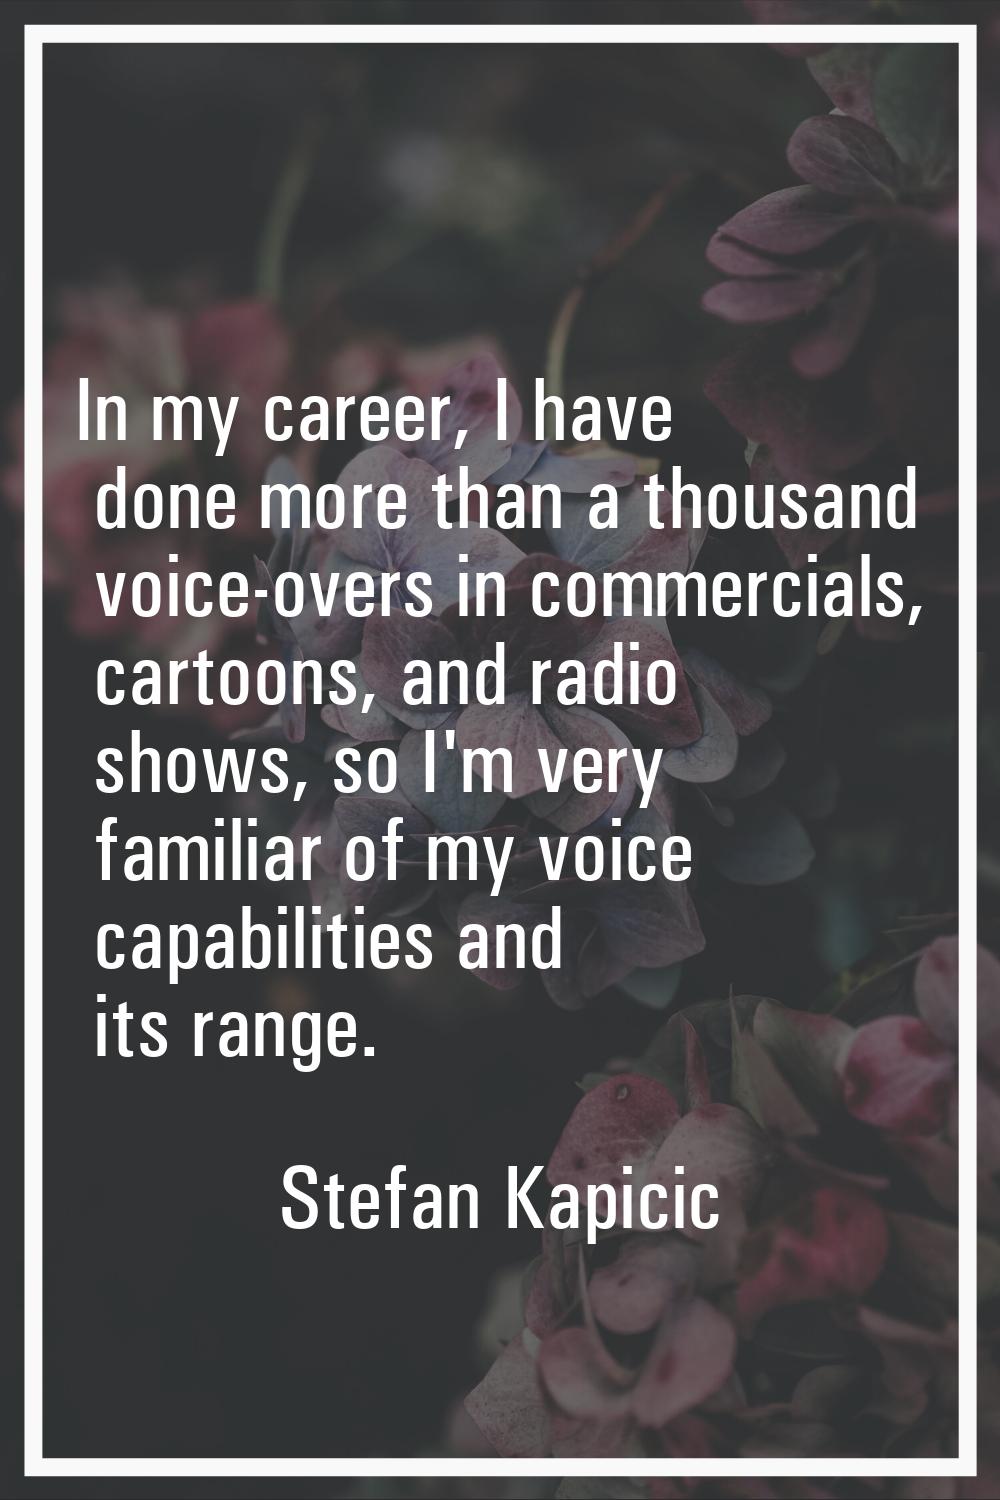 In my career, I have done more than a thousand voice-overs in commercials, cartoons, and radio show